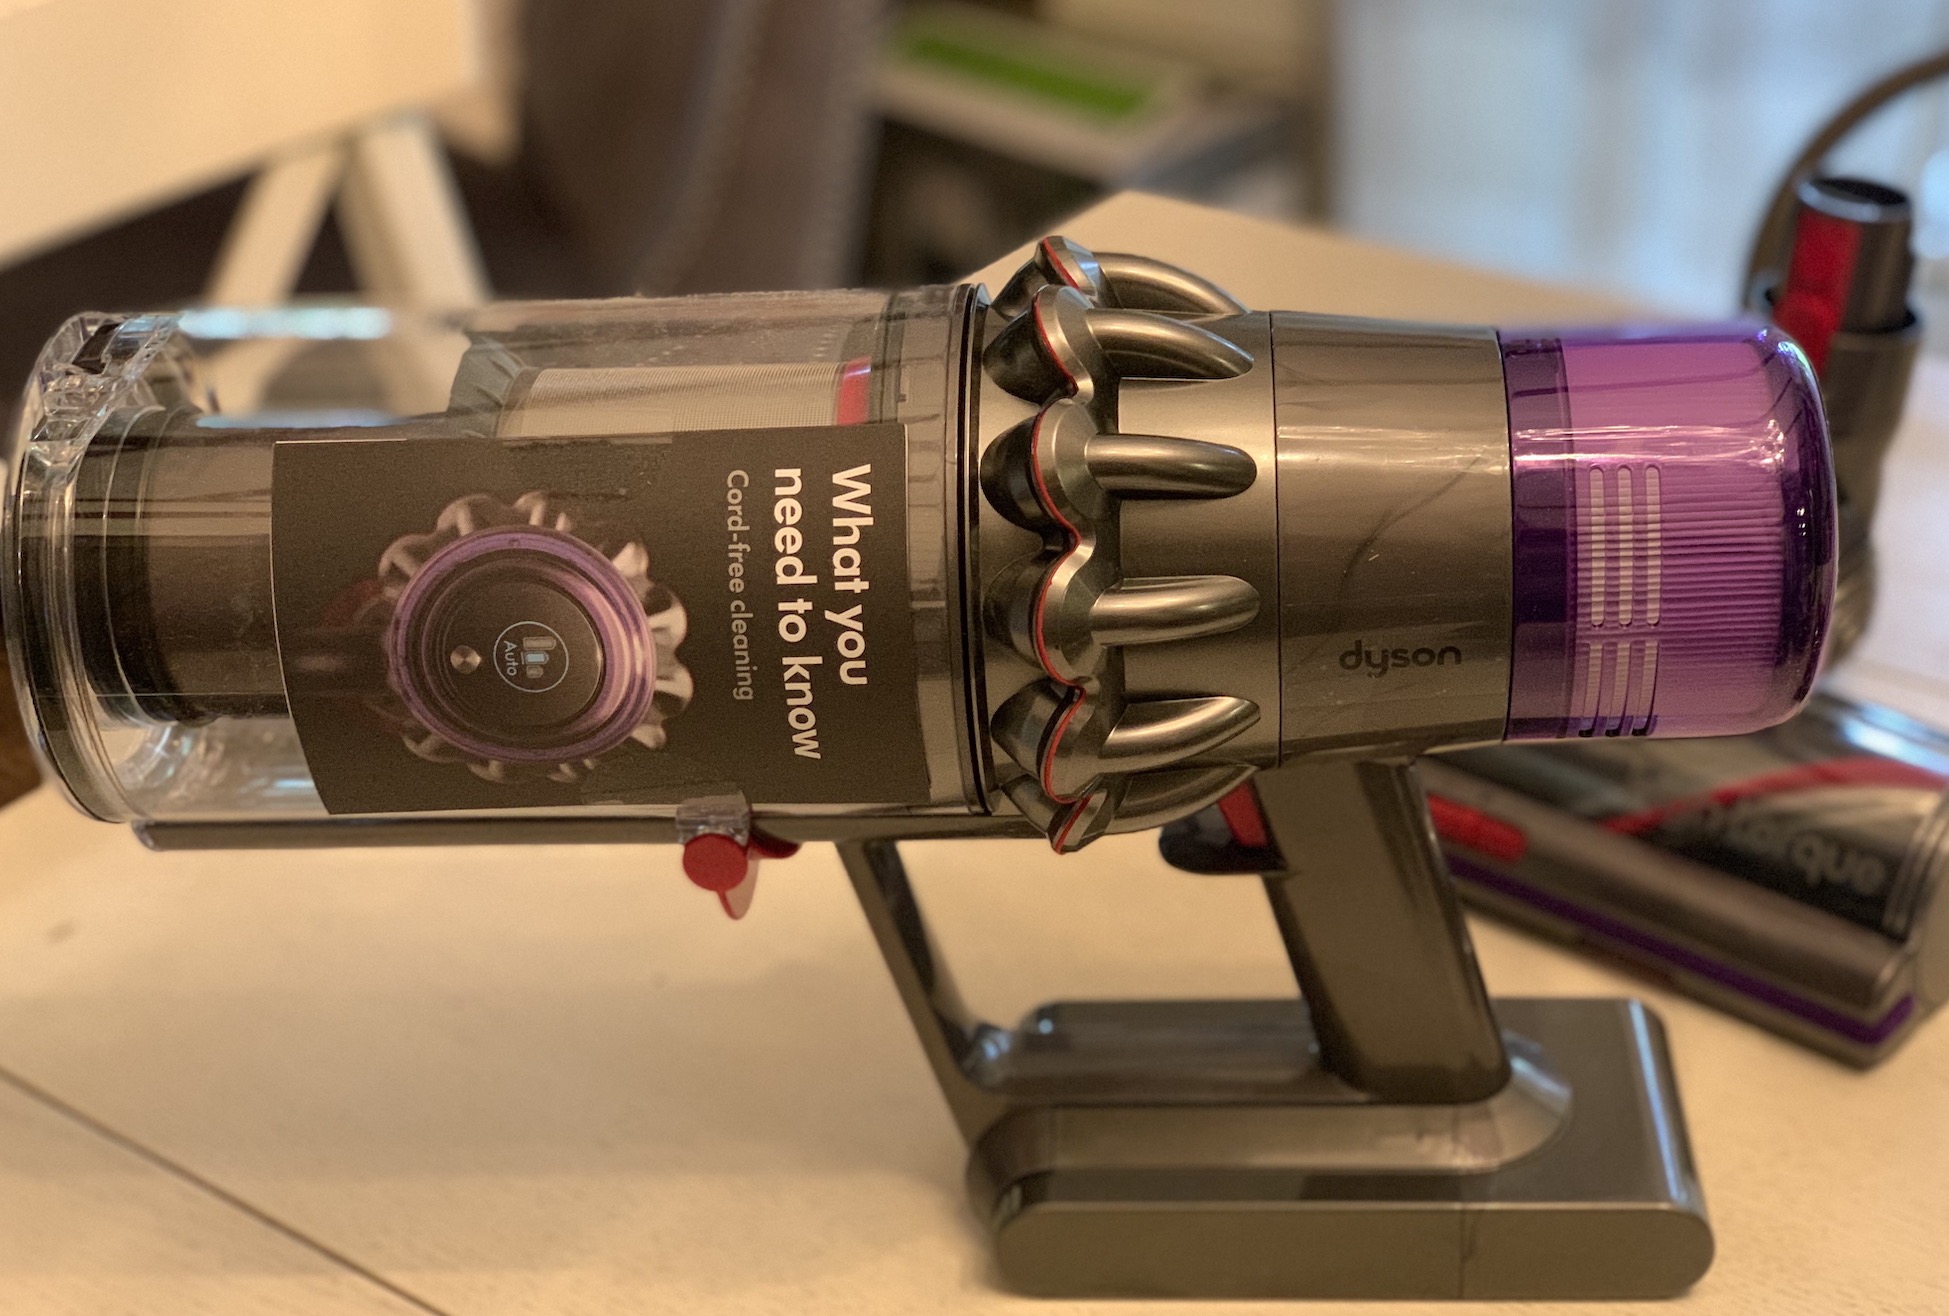 Dyson V11 Absolute Pro Cordless stick vacuum review | Best Buy Blog